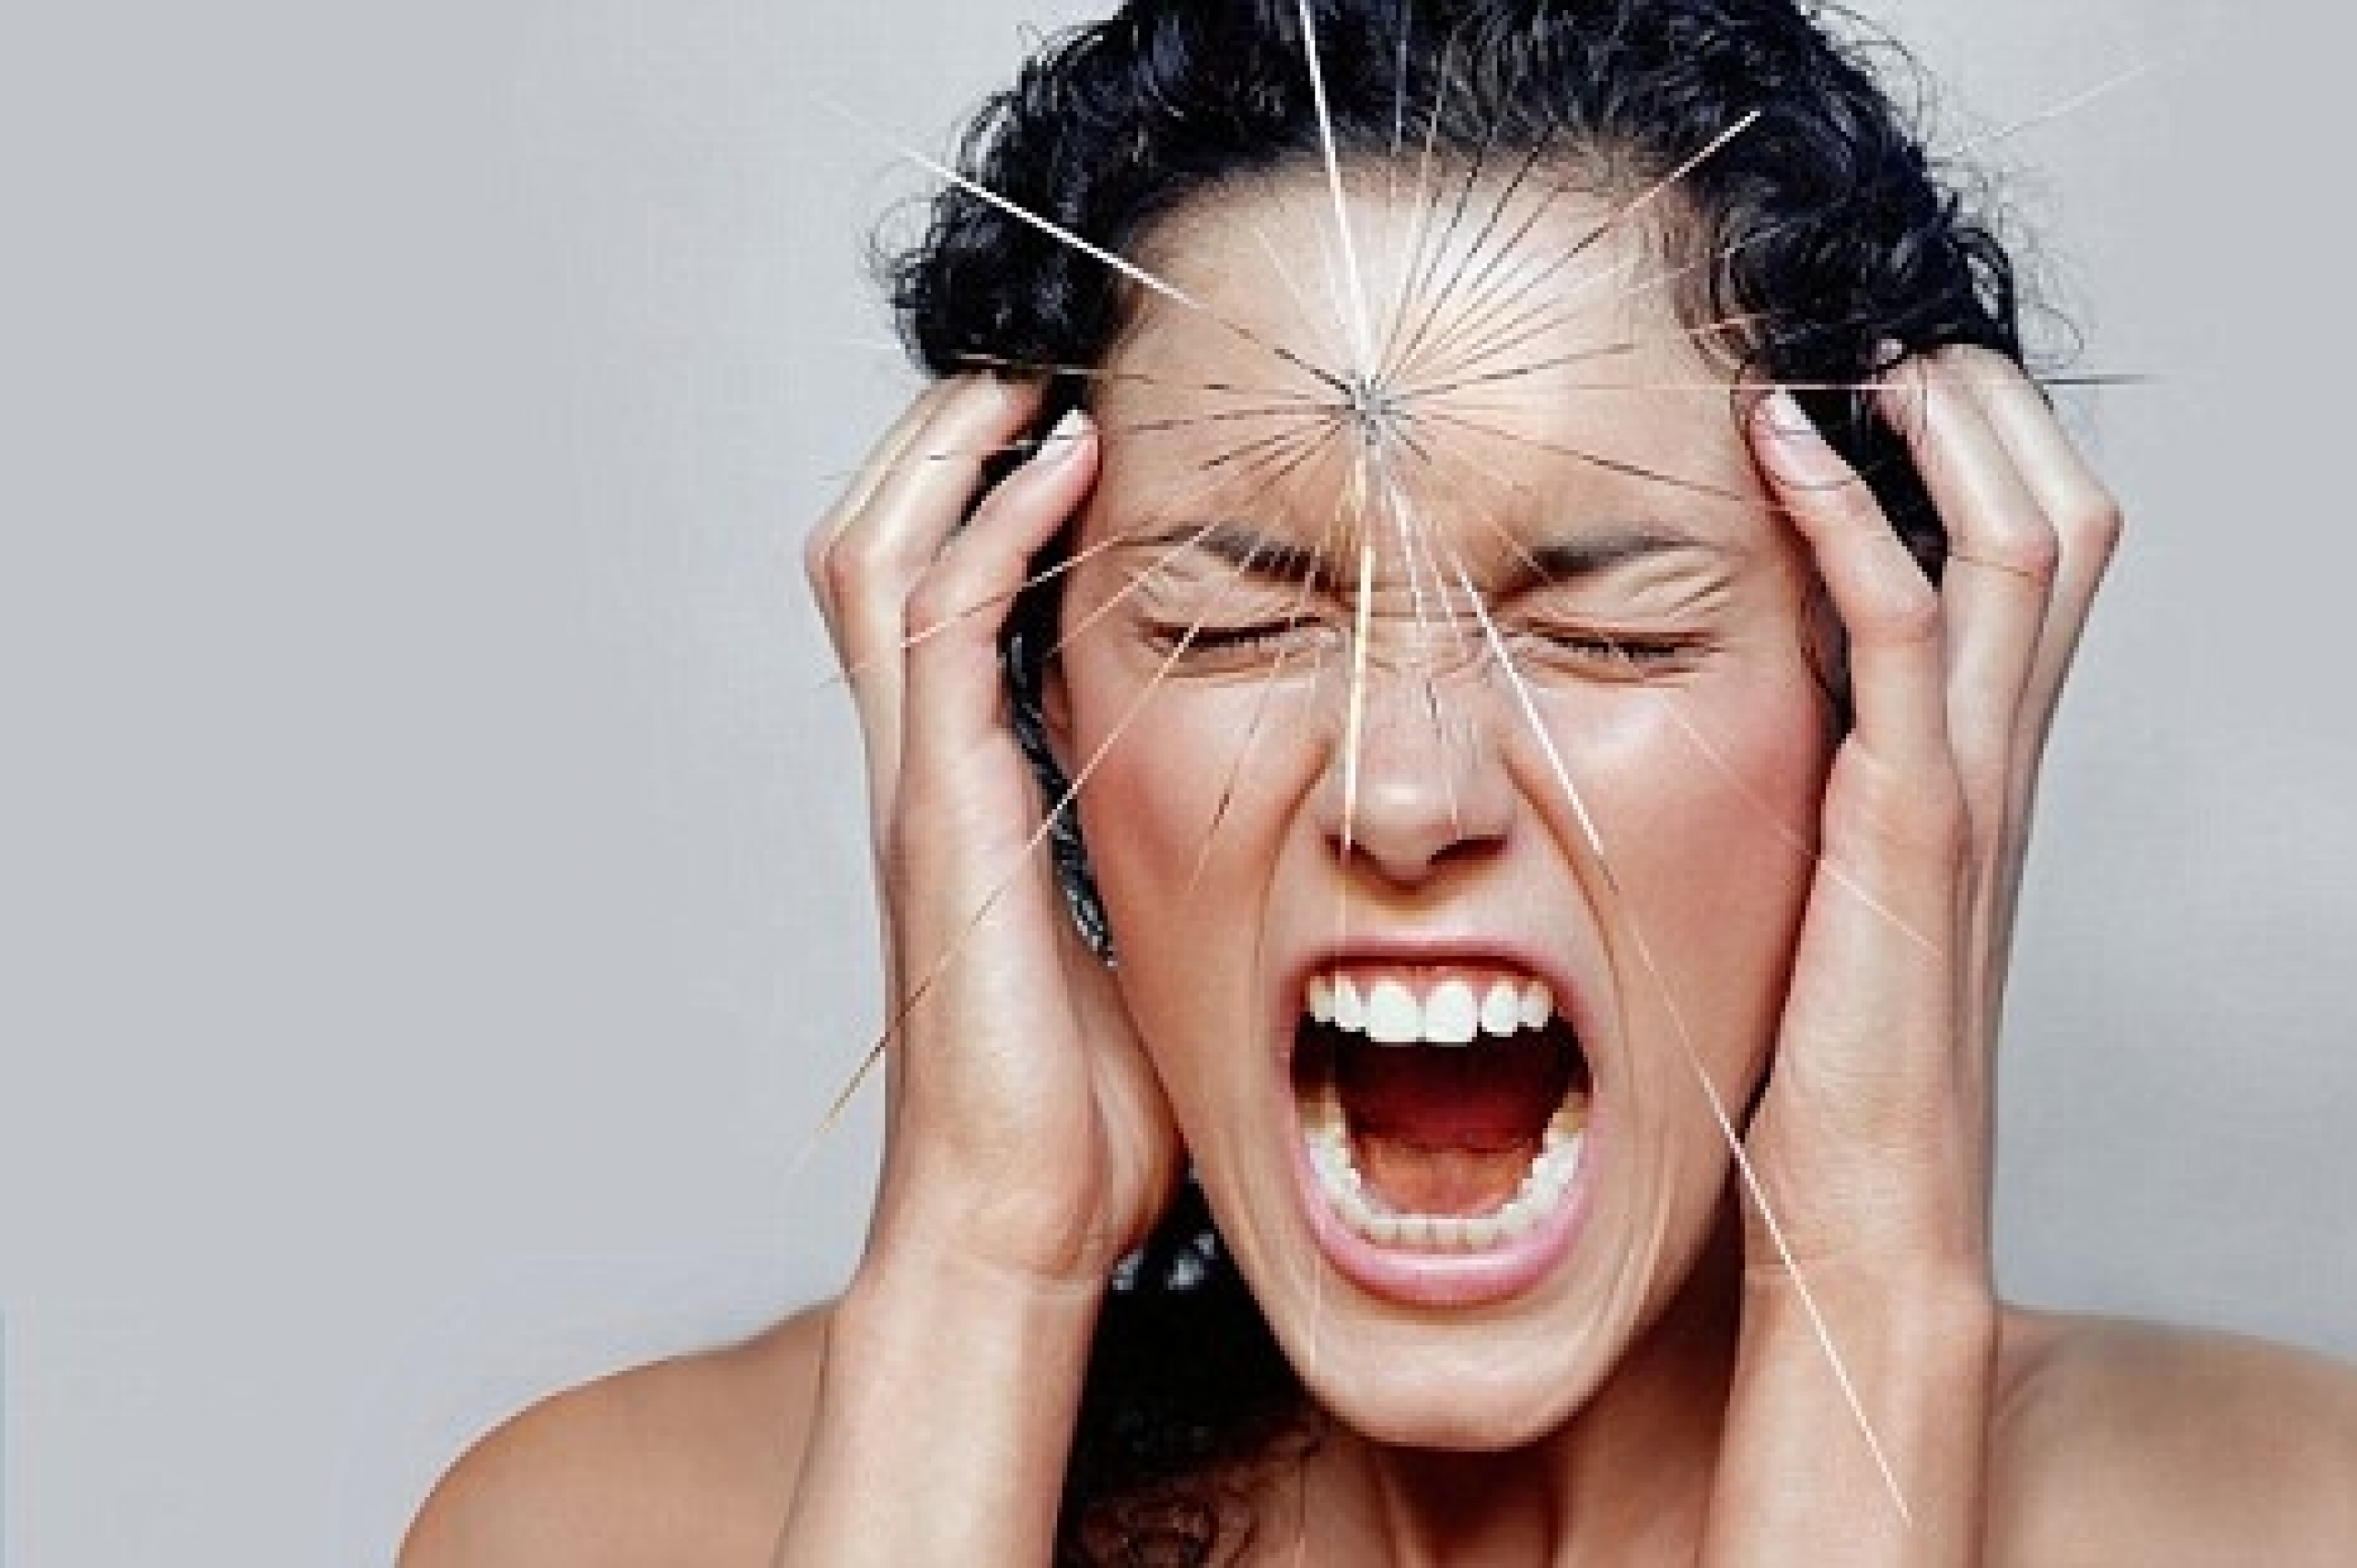 No More Pills: How to Get Rid of a Headache Without Medicine